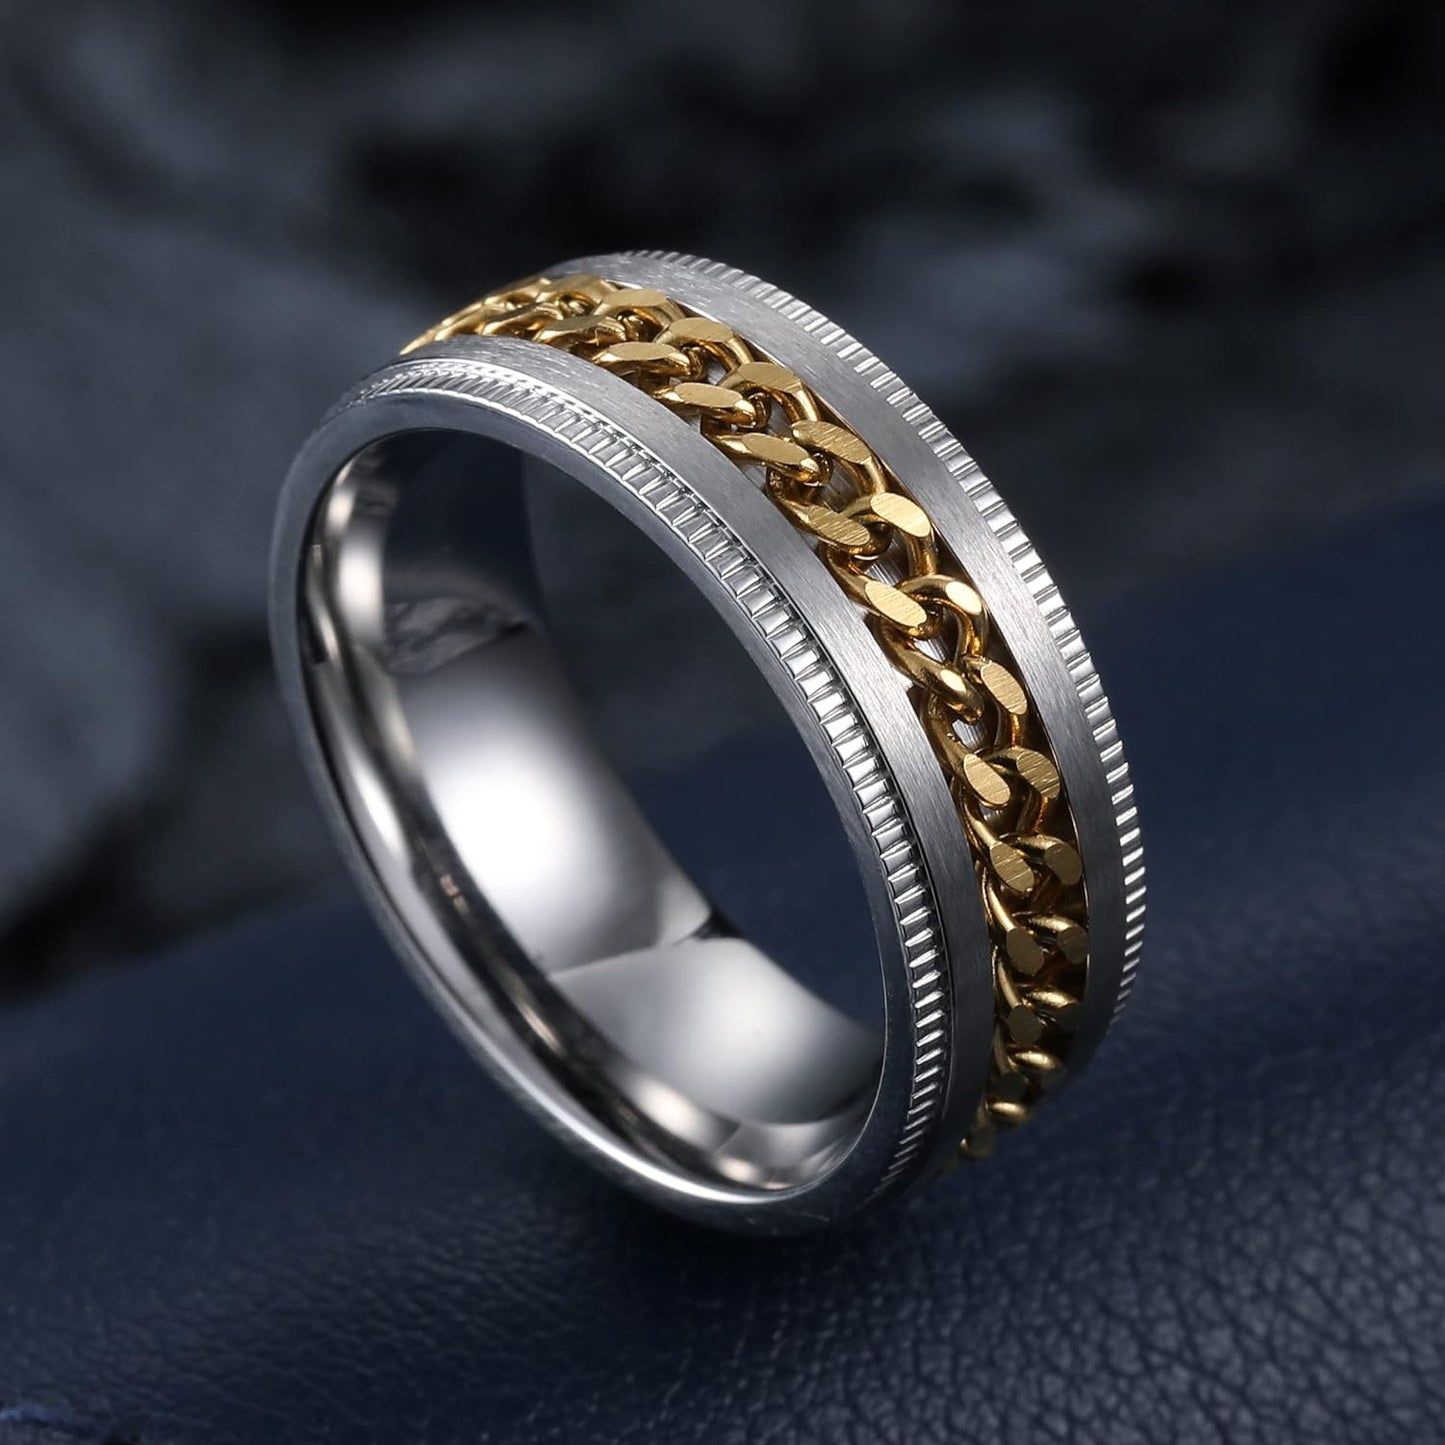 King Will Intertwine 8mm Spinner Ring Stainless Steel Fidget Ring Anxiety Ring for Men Black/Blue/Silver/Gold Fidget Anxiety Ring